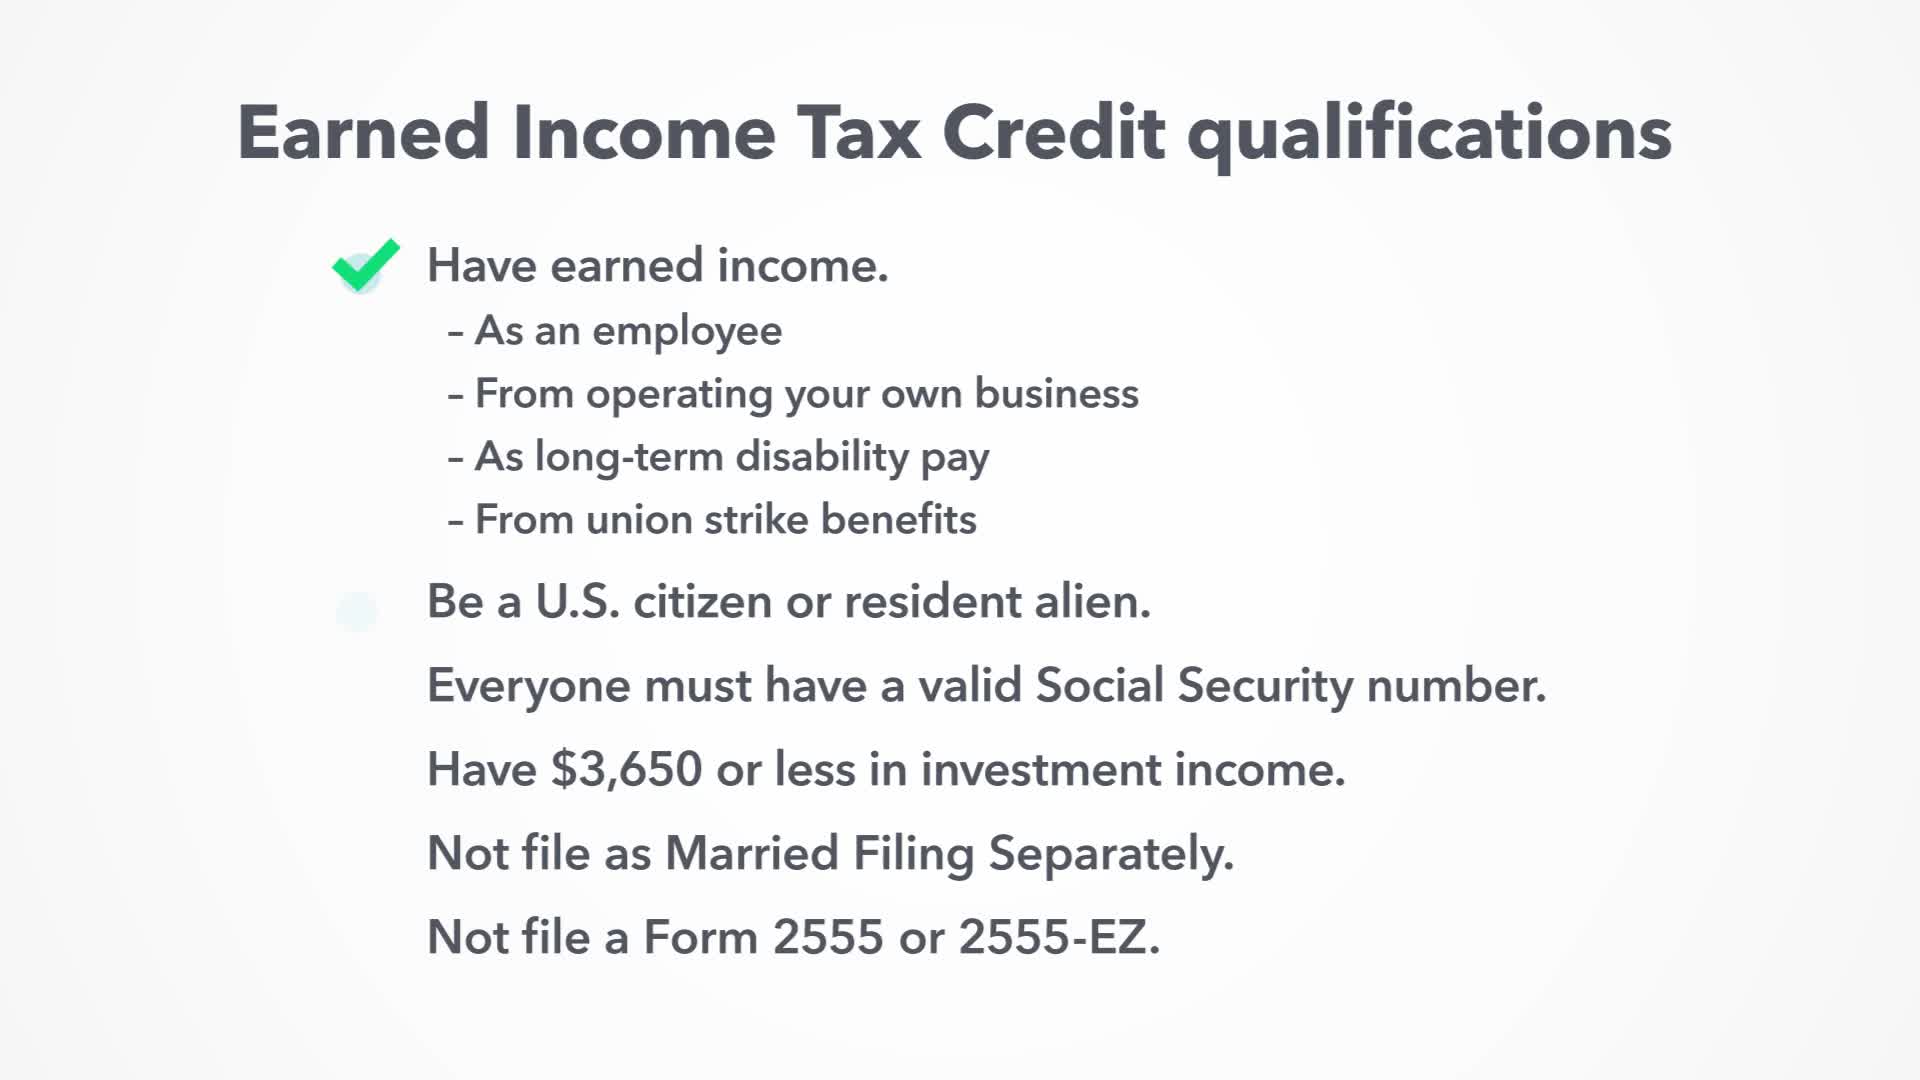 Who Qualifies for the Earned Tax Credit?